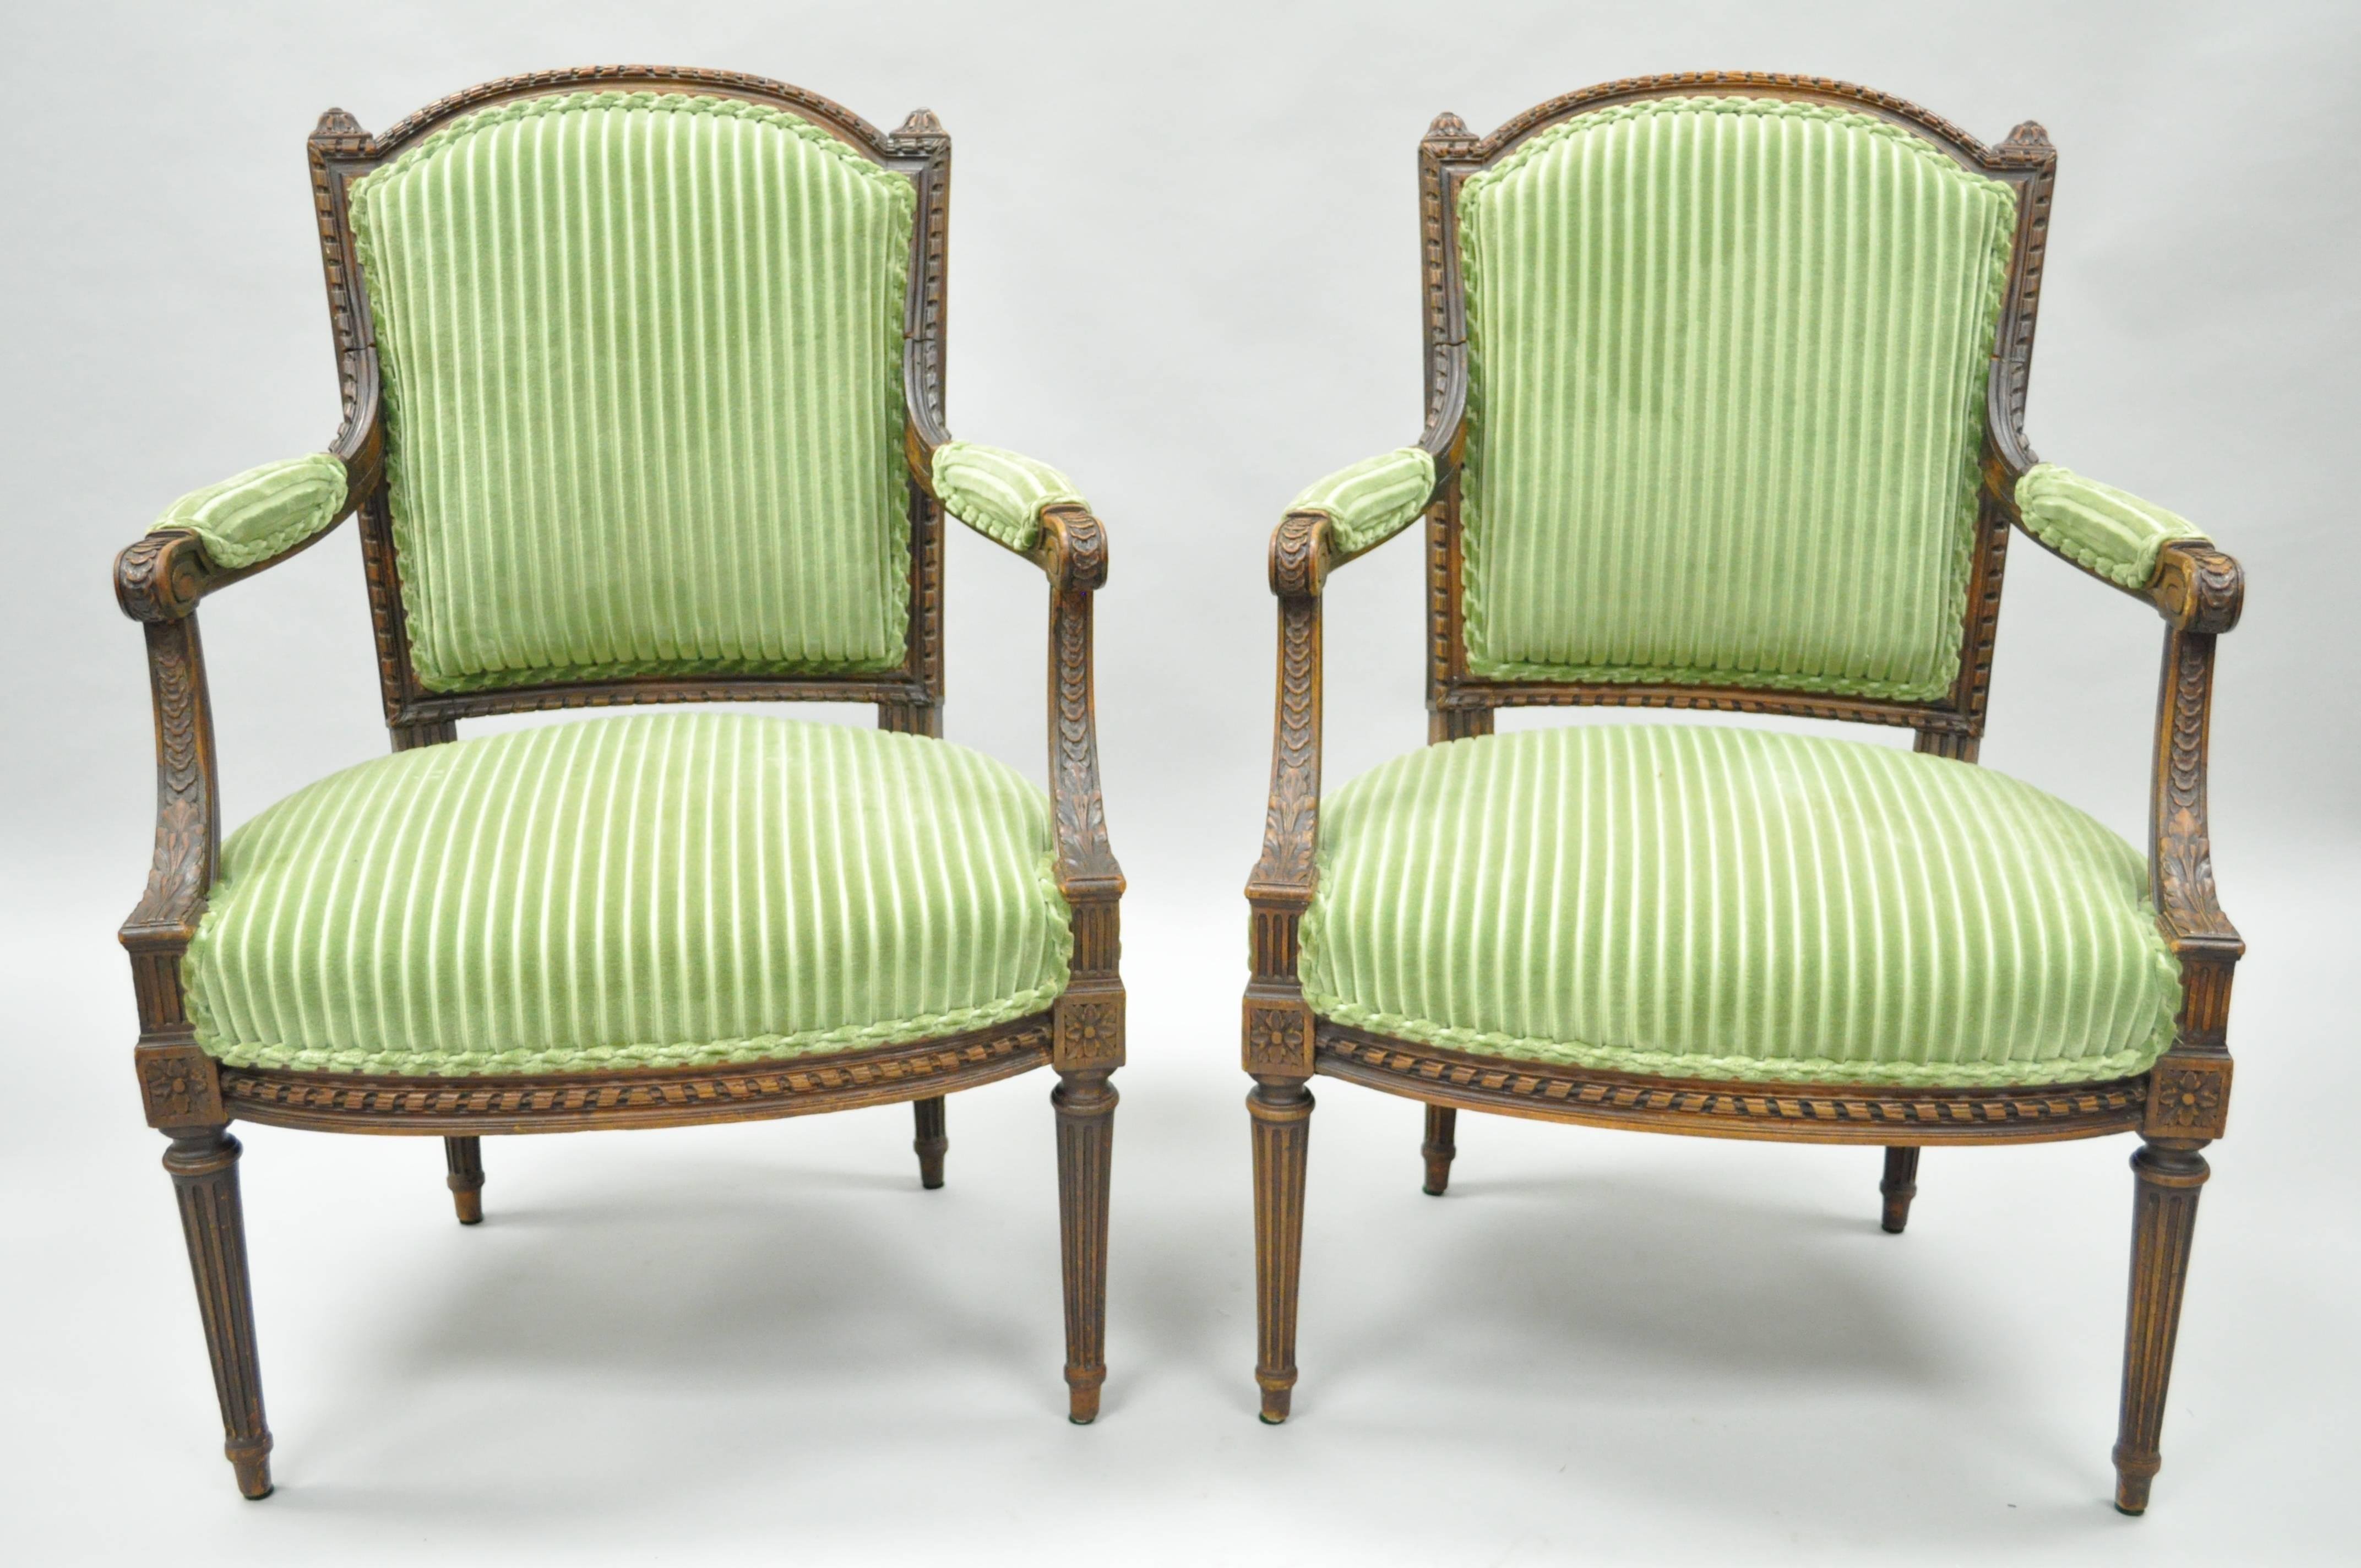 Remarkable pair of early 20th century French Louix XVI/Directoire style carved walnut armchairs. Chairs feature finely carved solid walnut wood frames, reeded and tapered legs, green upholstered frames, padded armrests and elegant French form.